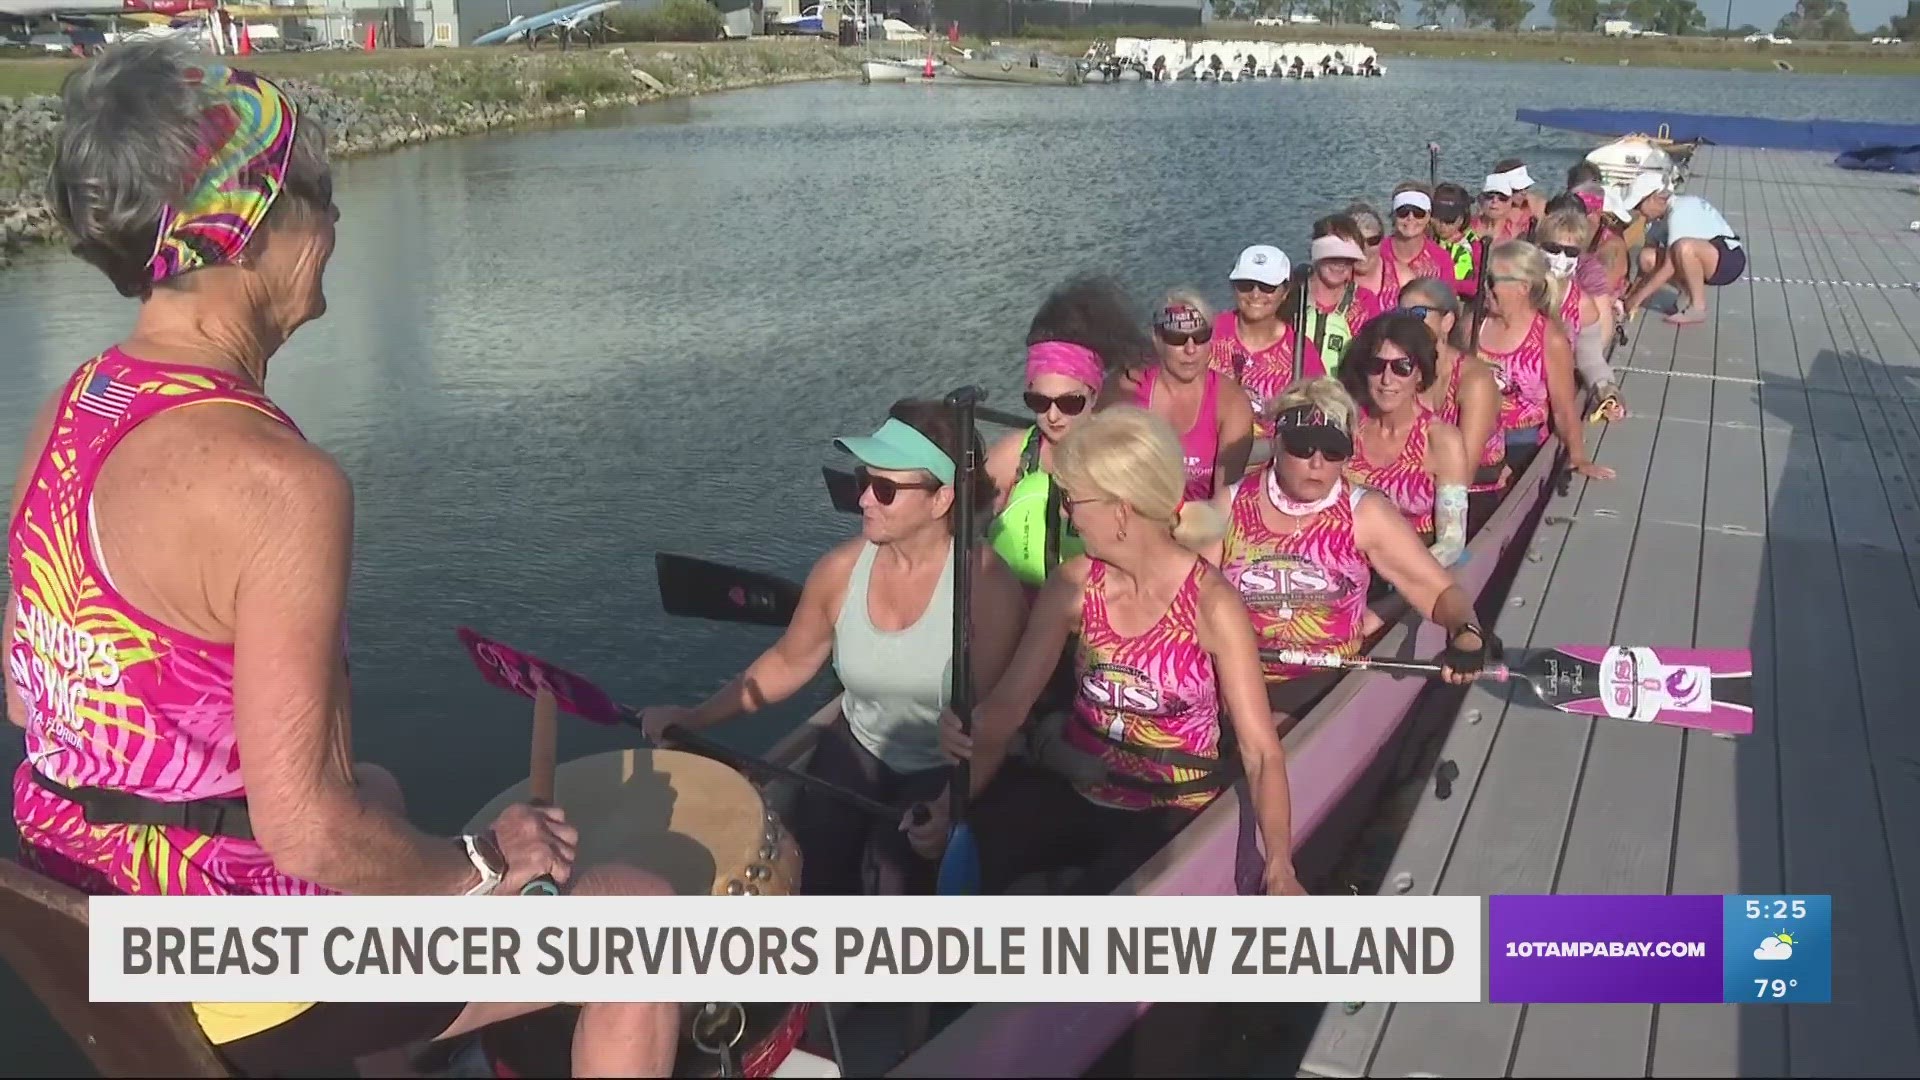 The team will compete in the 2023 edition of the International Breast Cancer Paddlers' Commission (IBCPC) Participatory Dragon Boat Festival in Lake Karapiro.